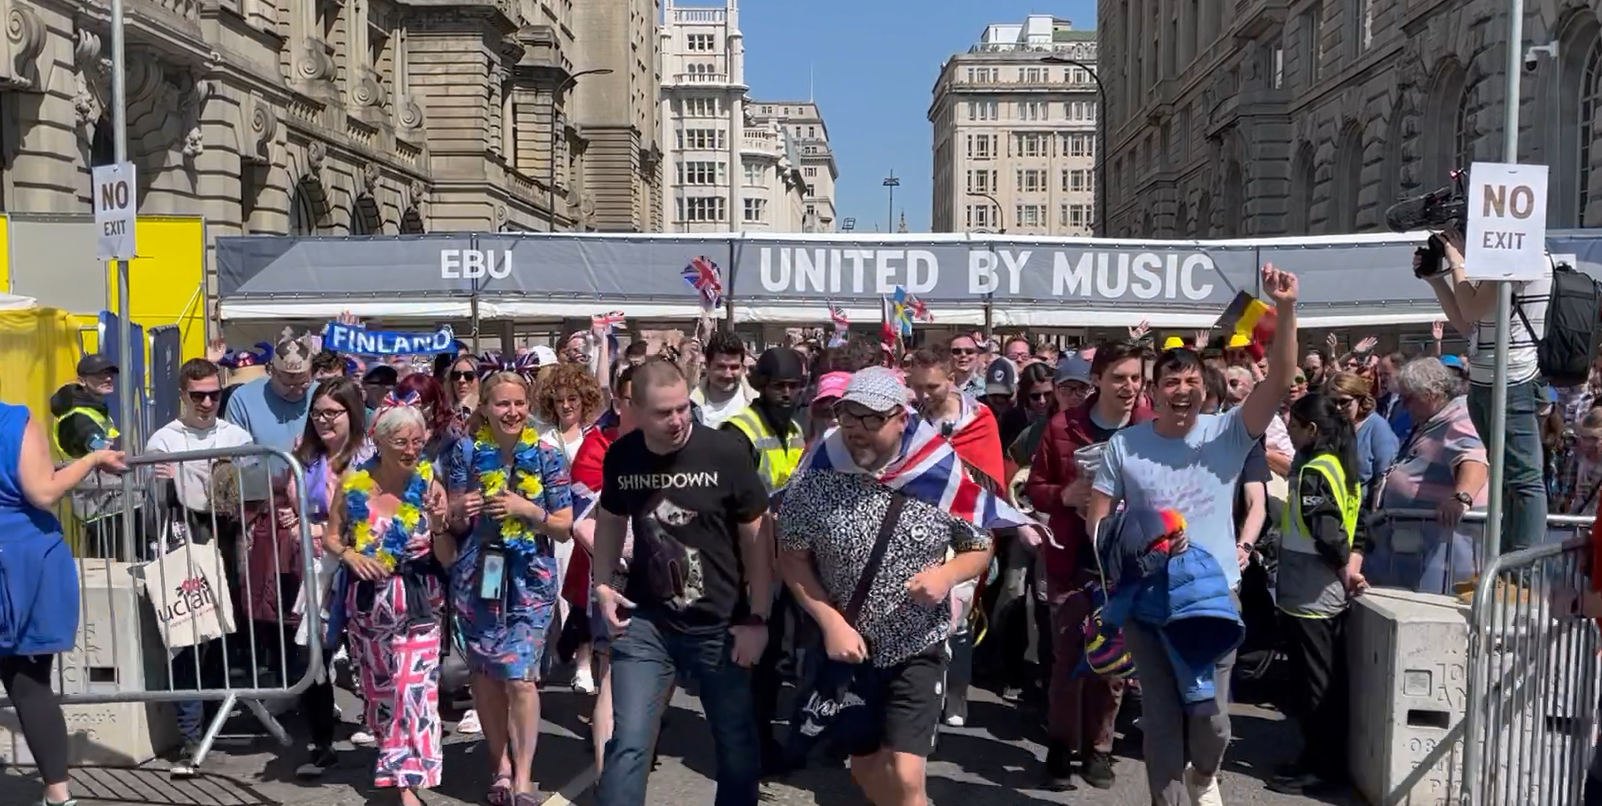 The gates of the Eurovision Village at Pier Head in Liverpool are opened